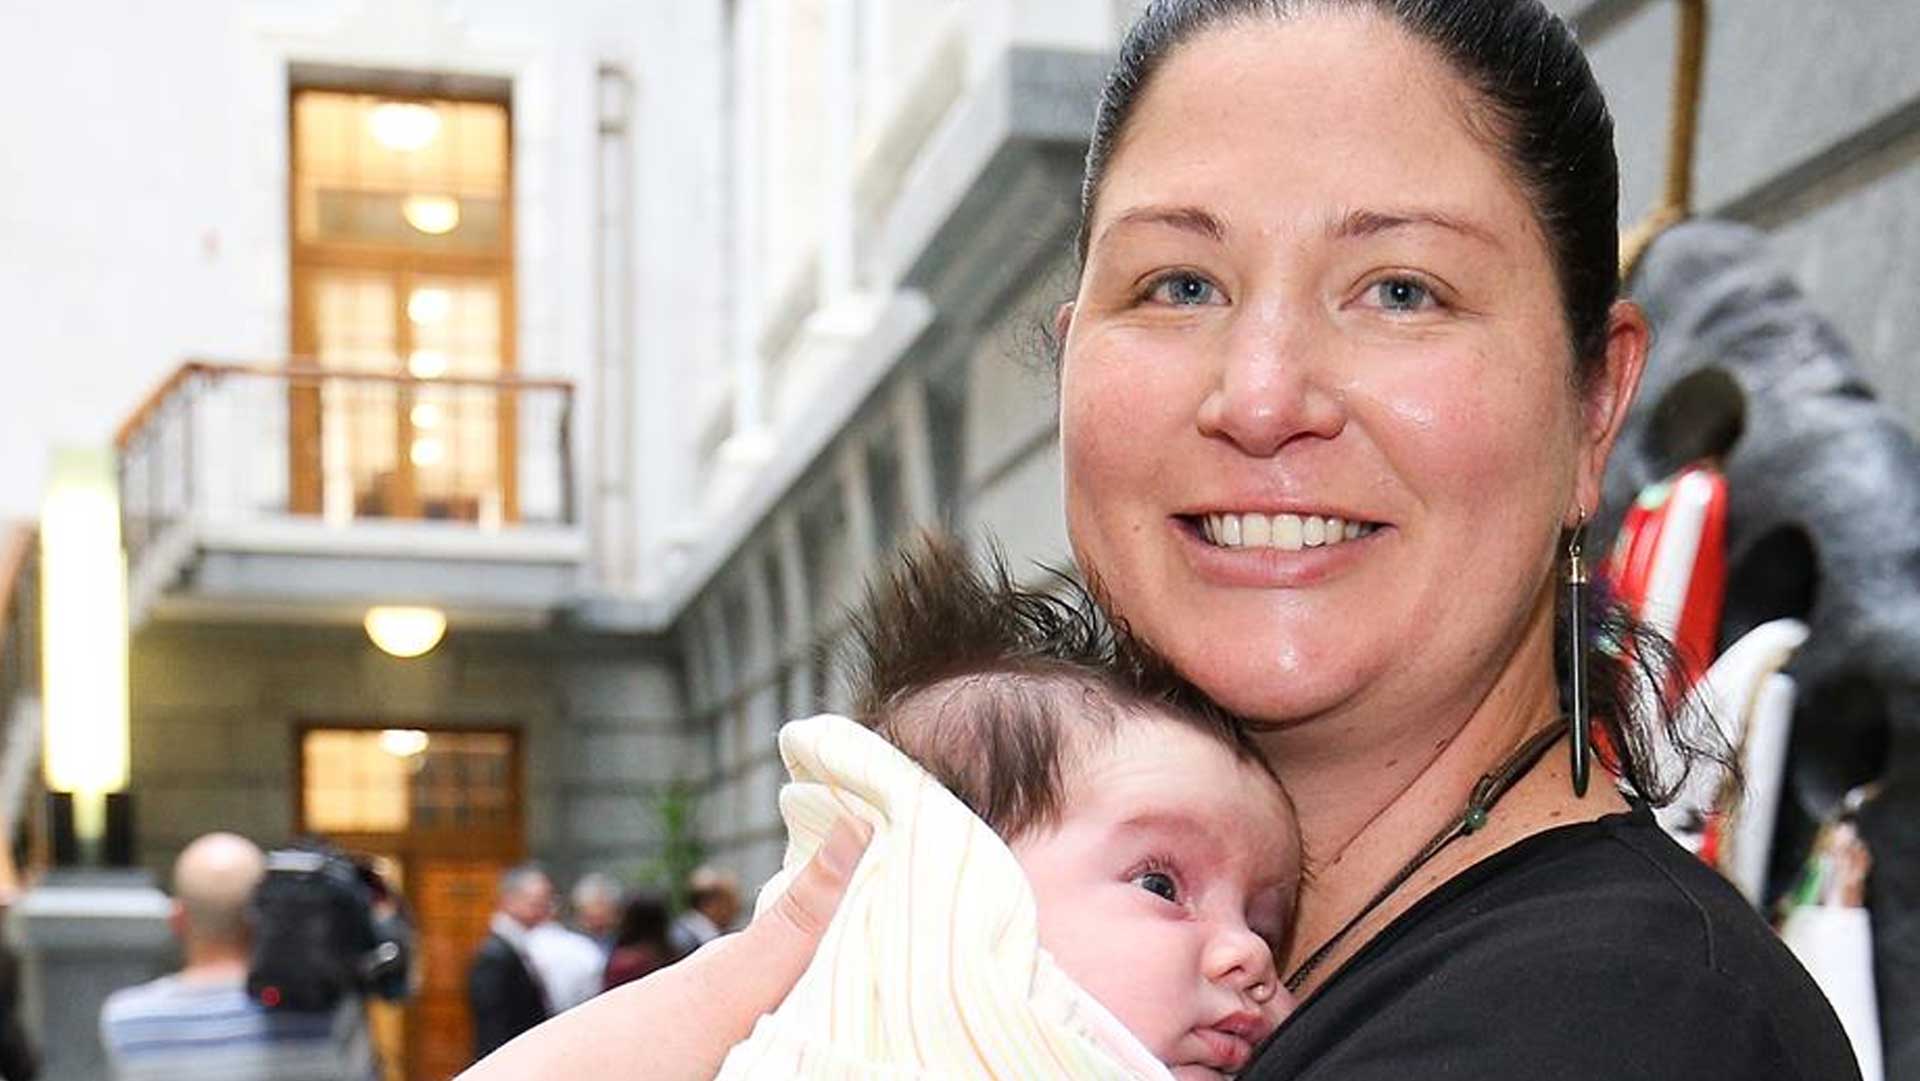 Willow-Jean Prime has just breastfed her baby in the debating chamber in Parliament – and we love it!